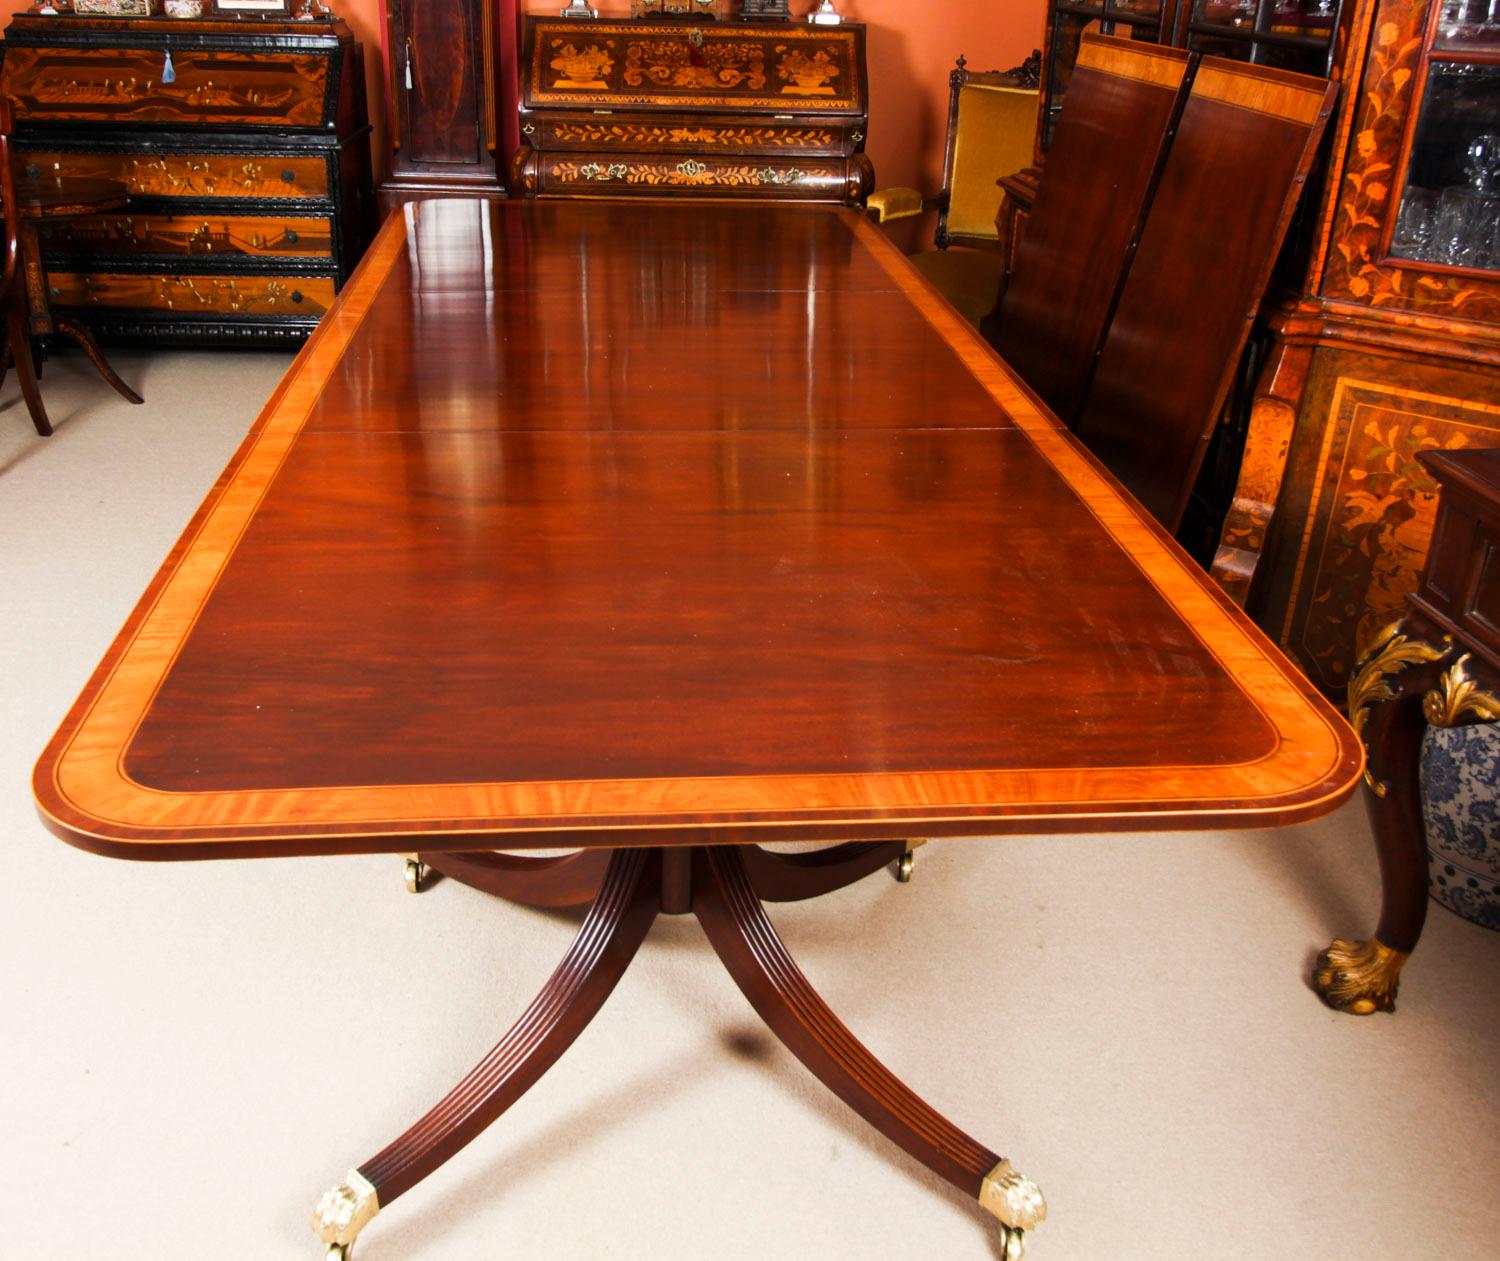 Antique Regency Metamorphic Dining Table and 12 Chairs, 19th Century 3